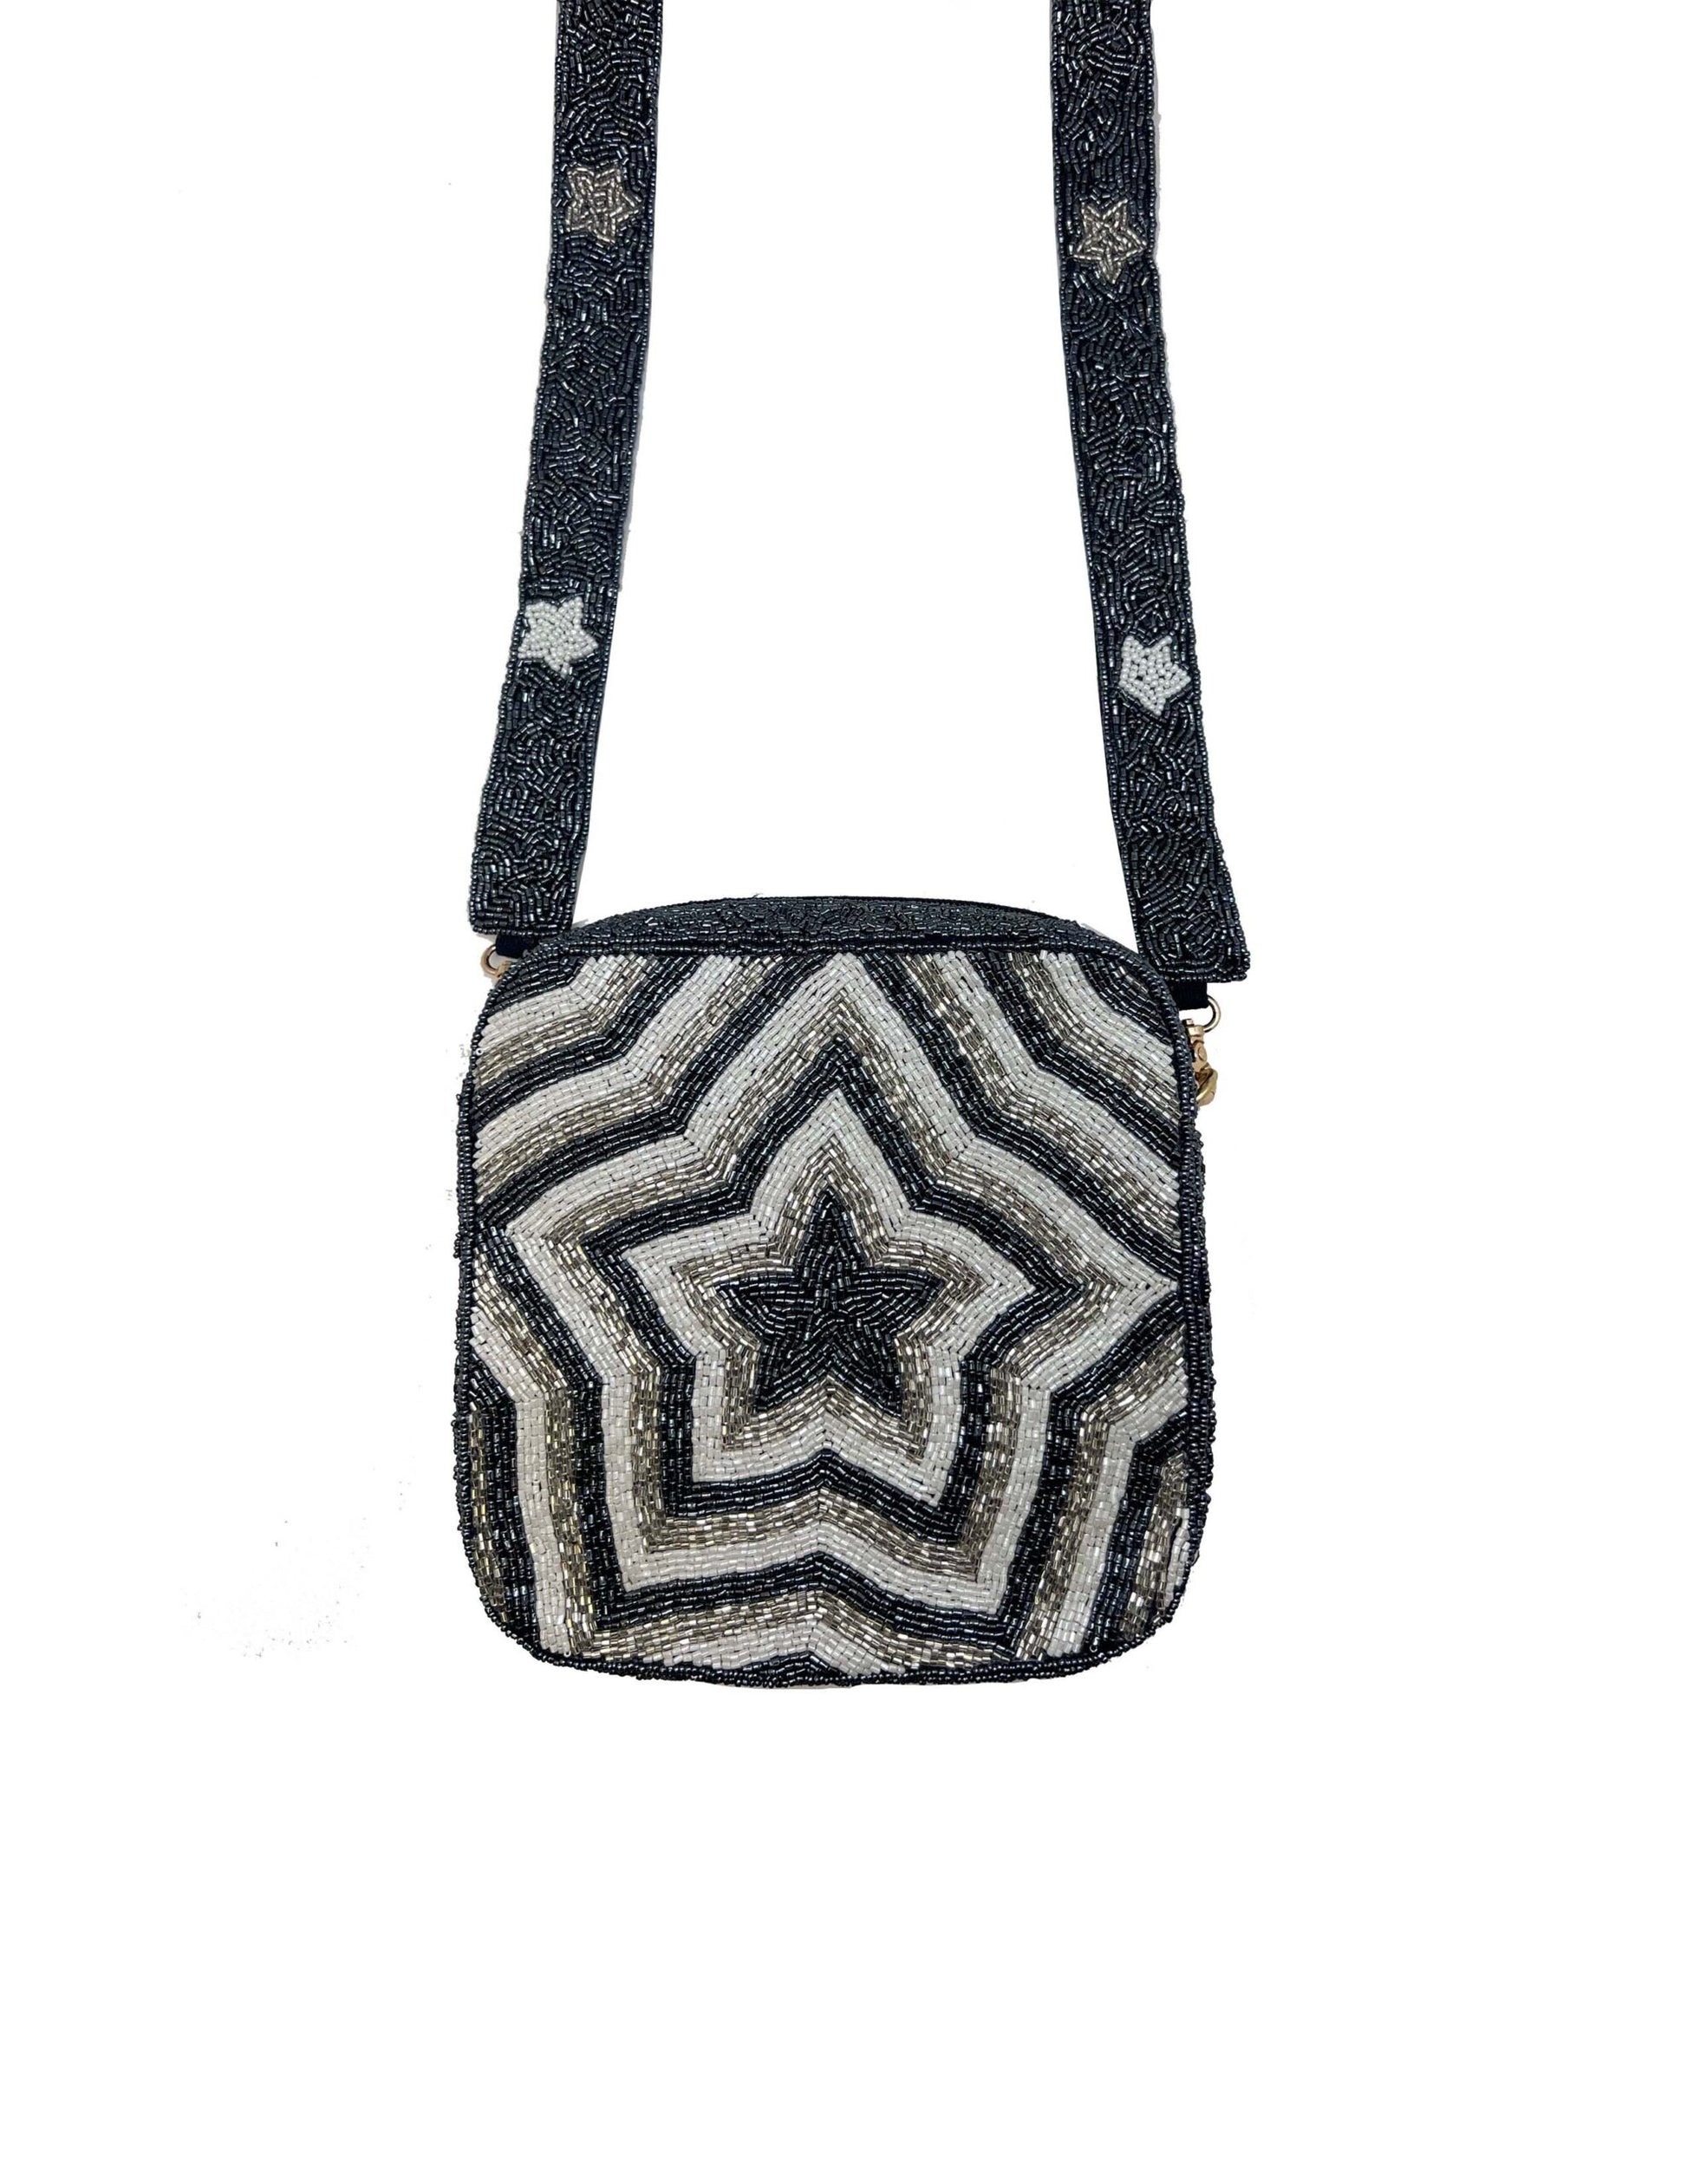 Blue Star with White and Silver Studded Bag Purses + Totes LA Chic   